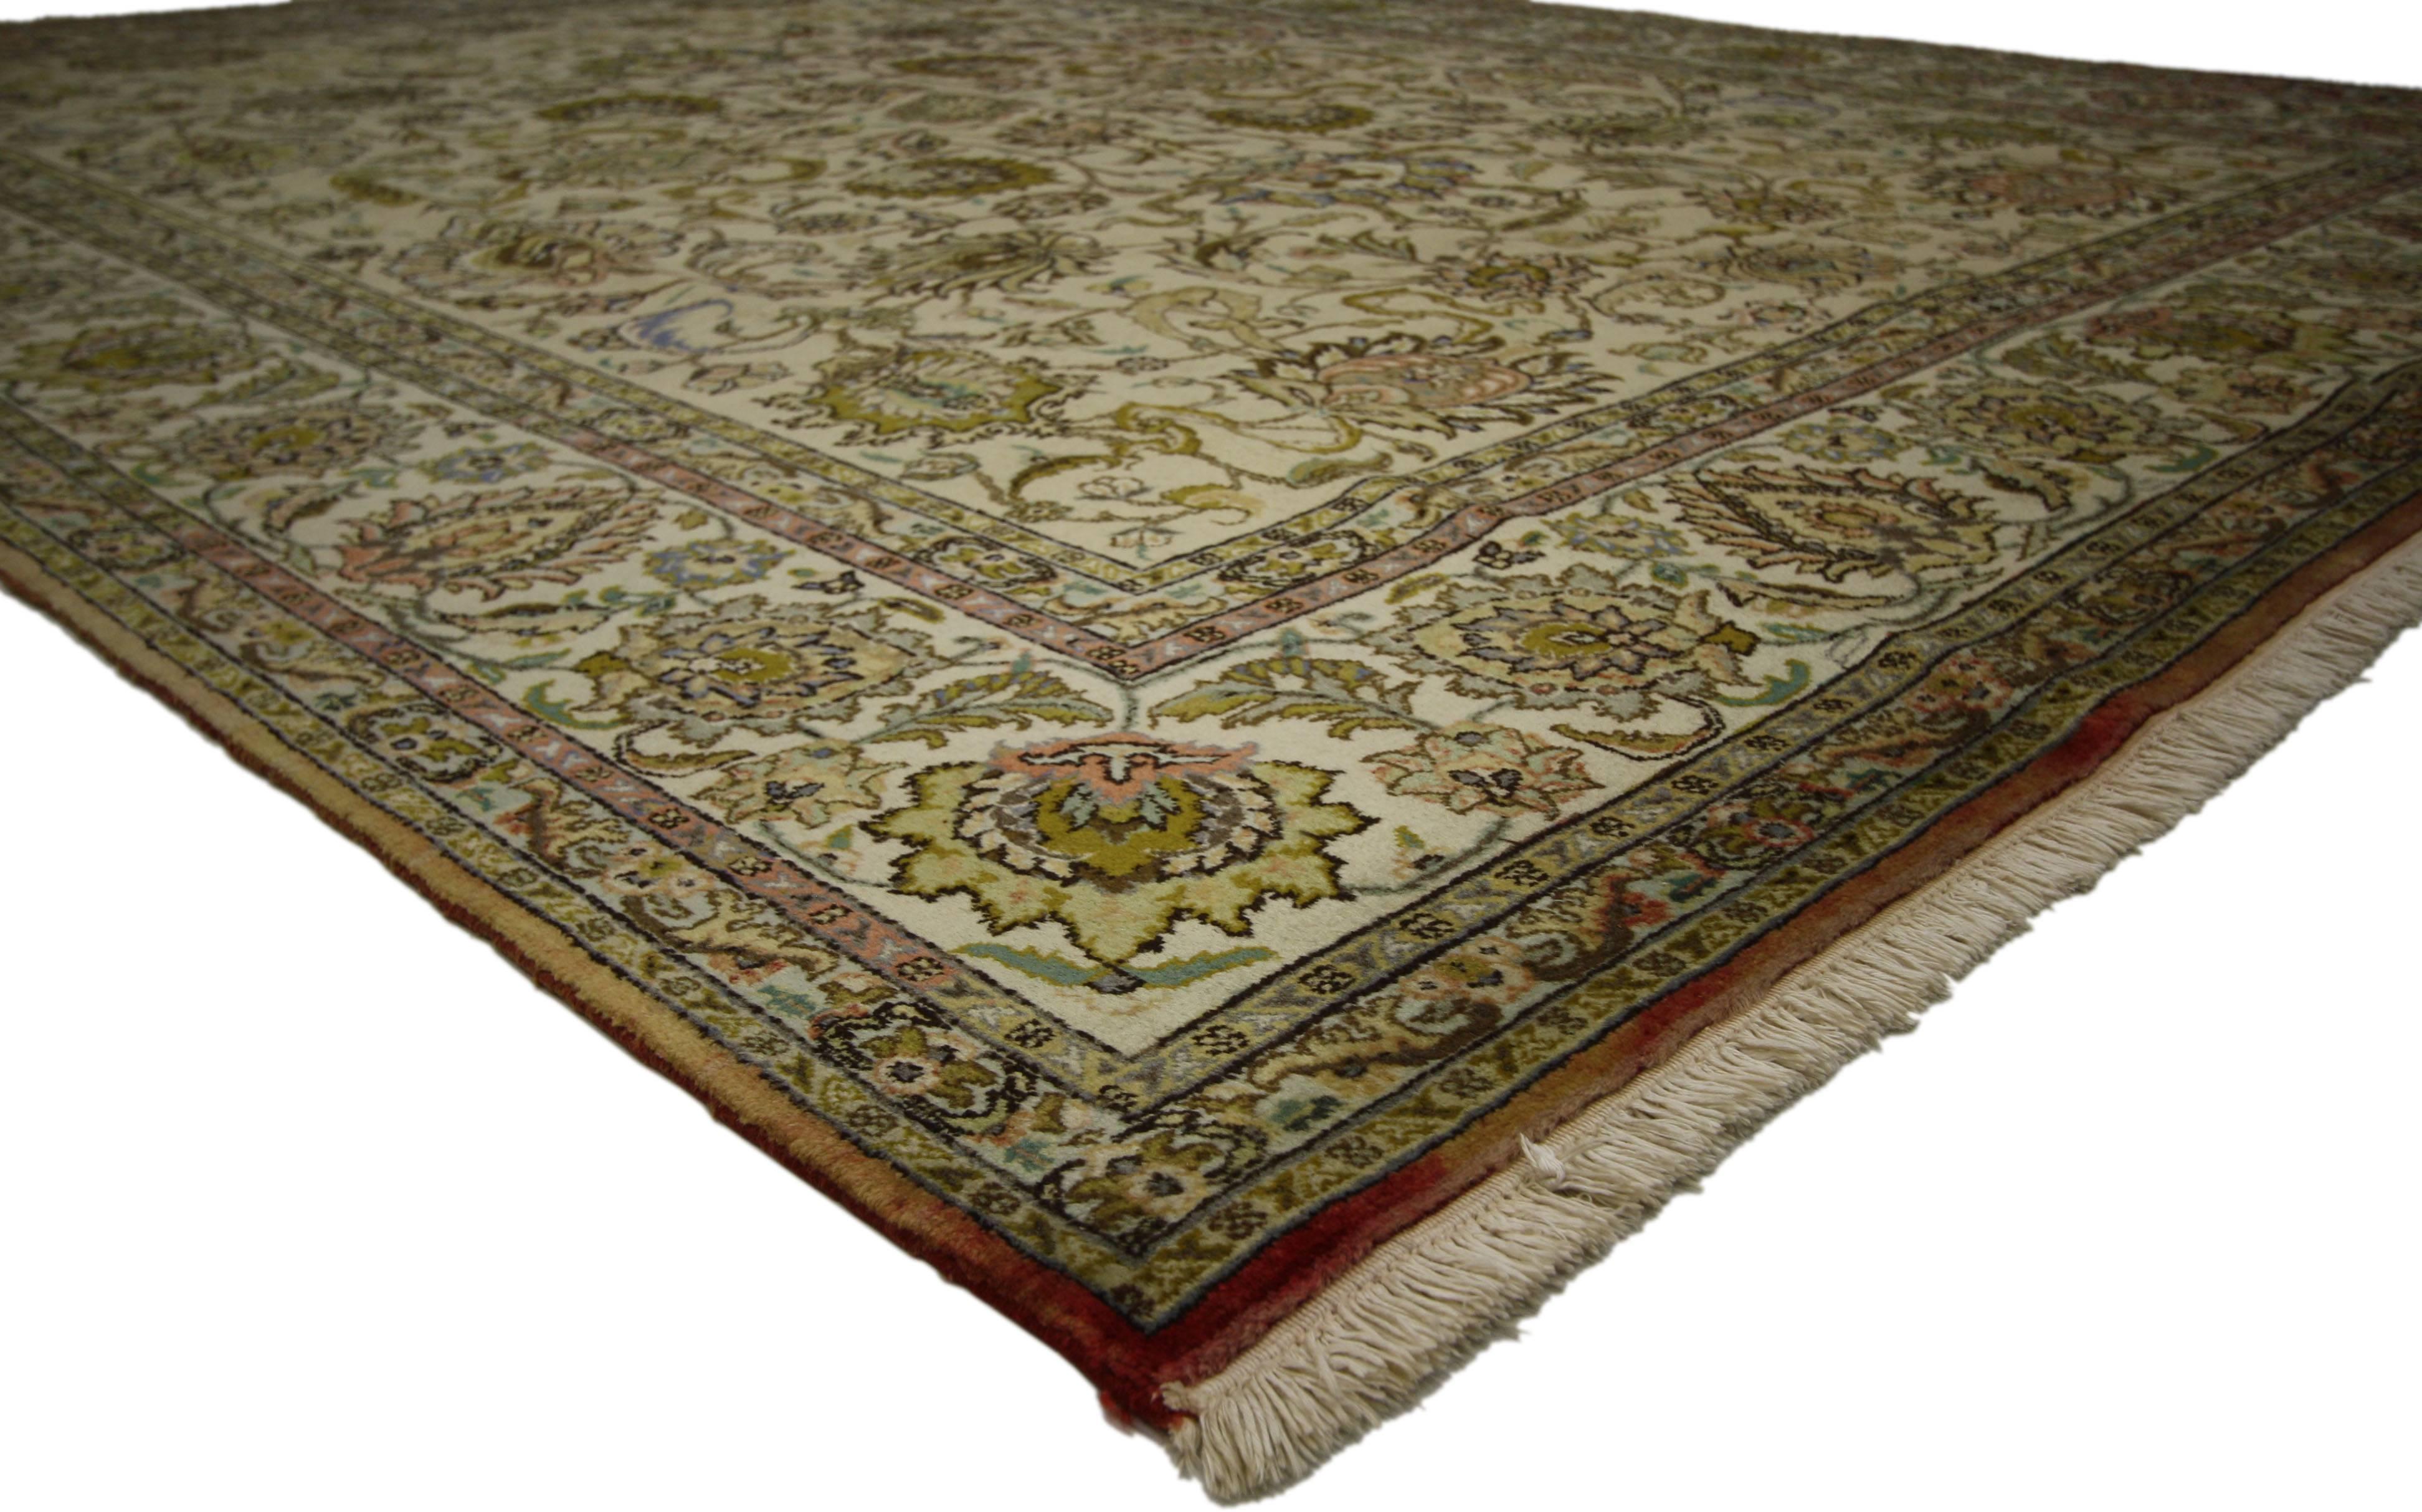 71929 Vintage Persian Tabriz Area Rug with French Provincial Cottage Style. Timeless and refined, this hand-knotted wool vintage Persian Tabriz rug features an all-over floral patter composed of blooming palmettes, leafy tendrils, rosettes, and